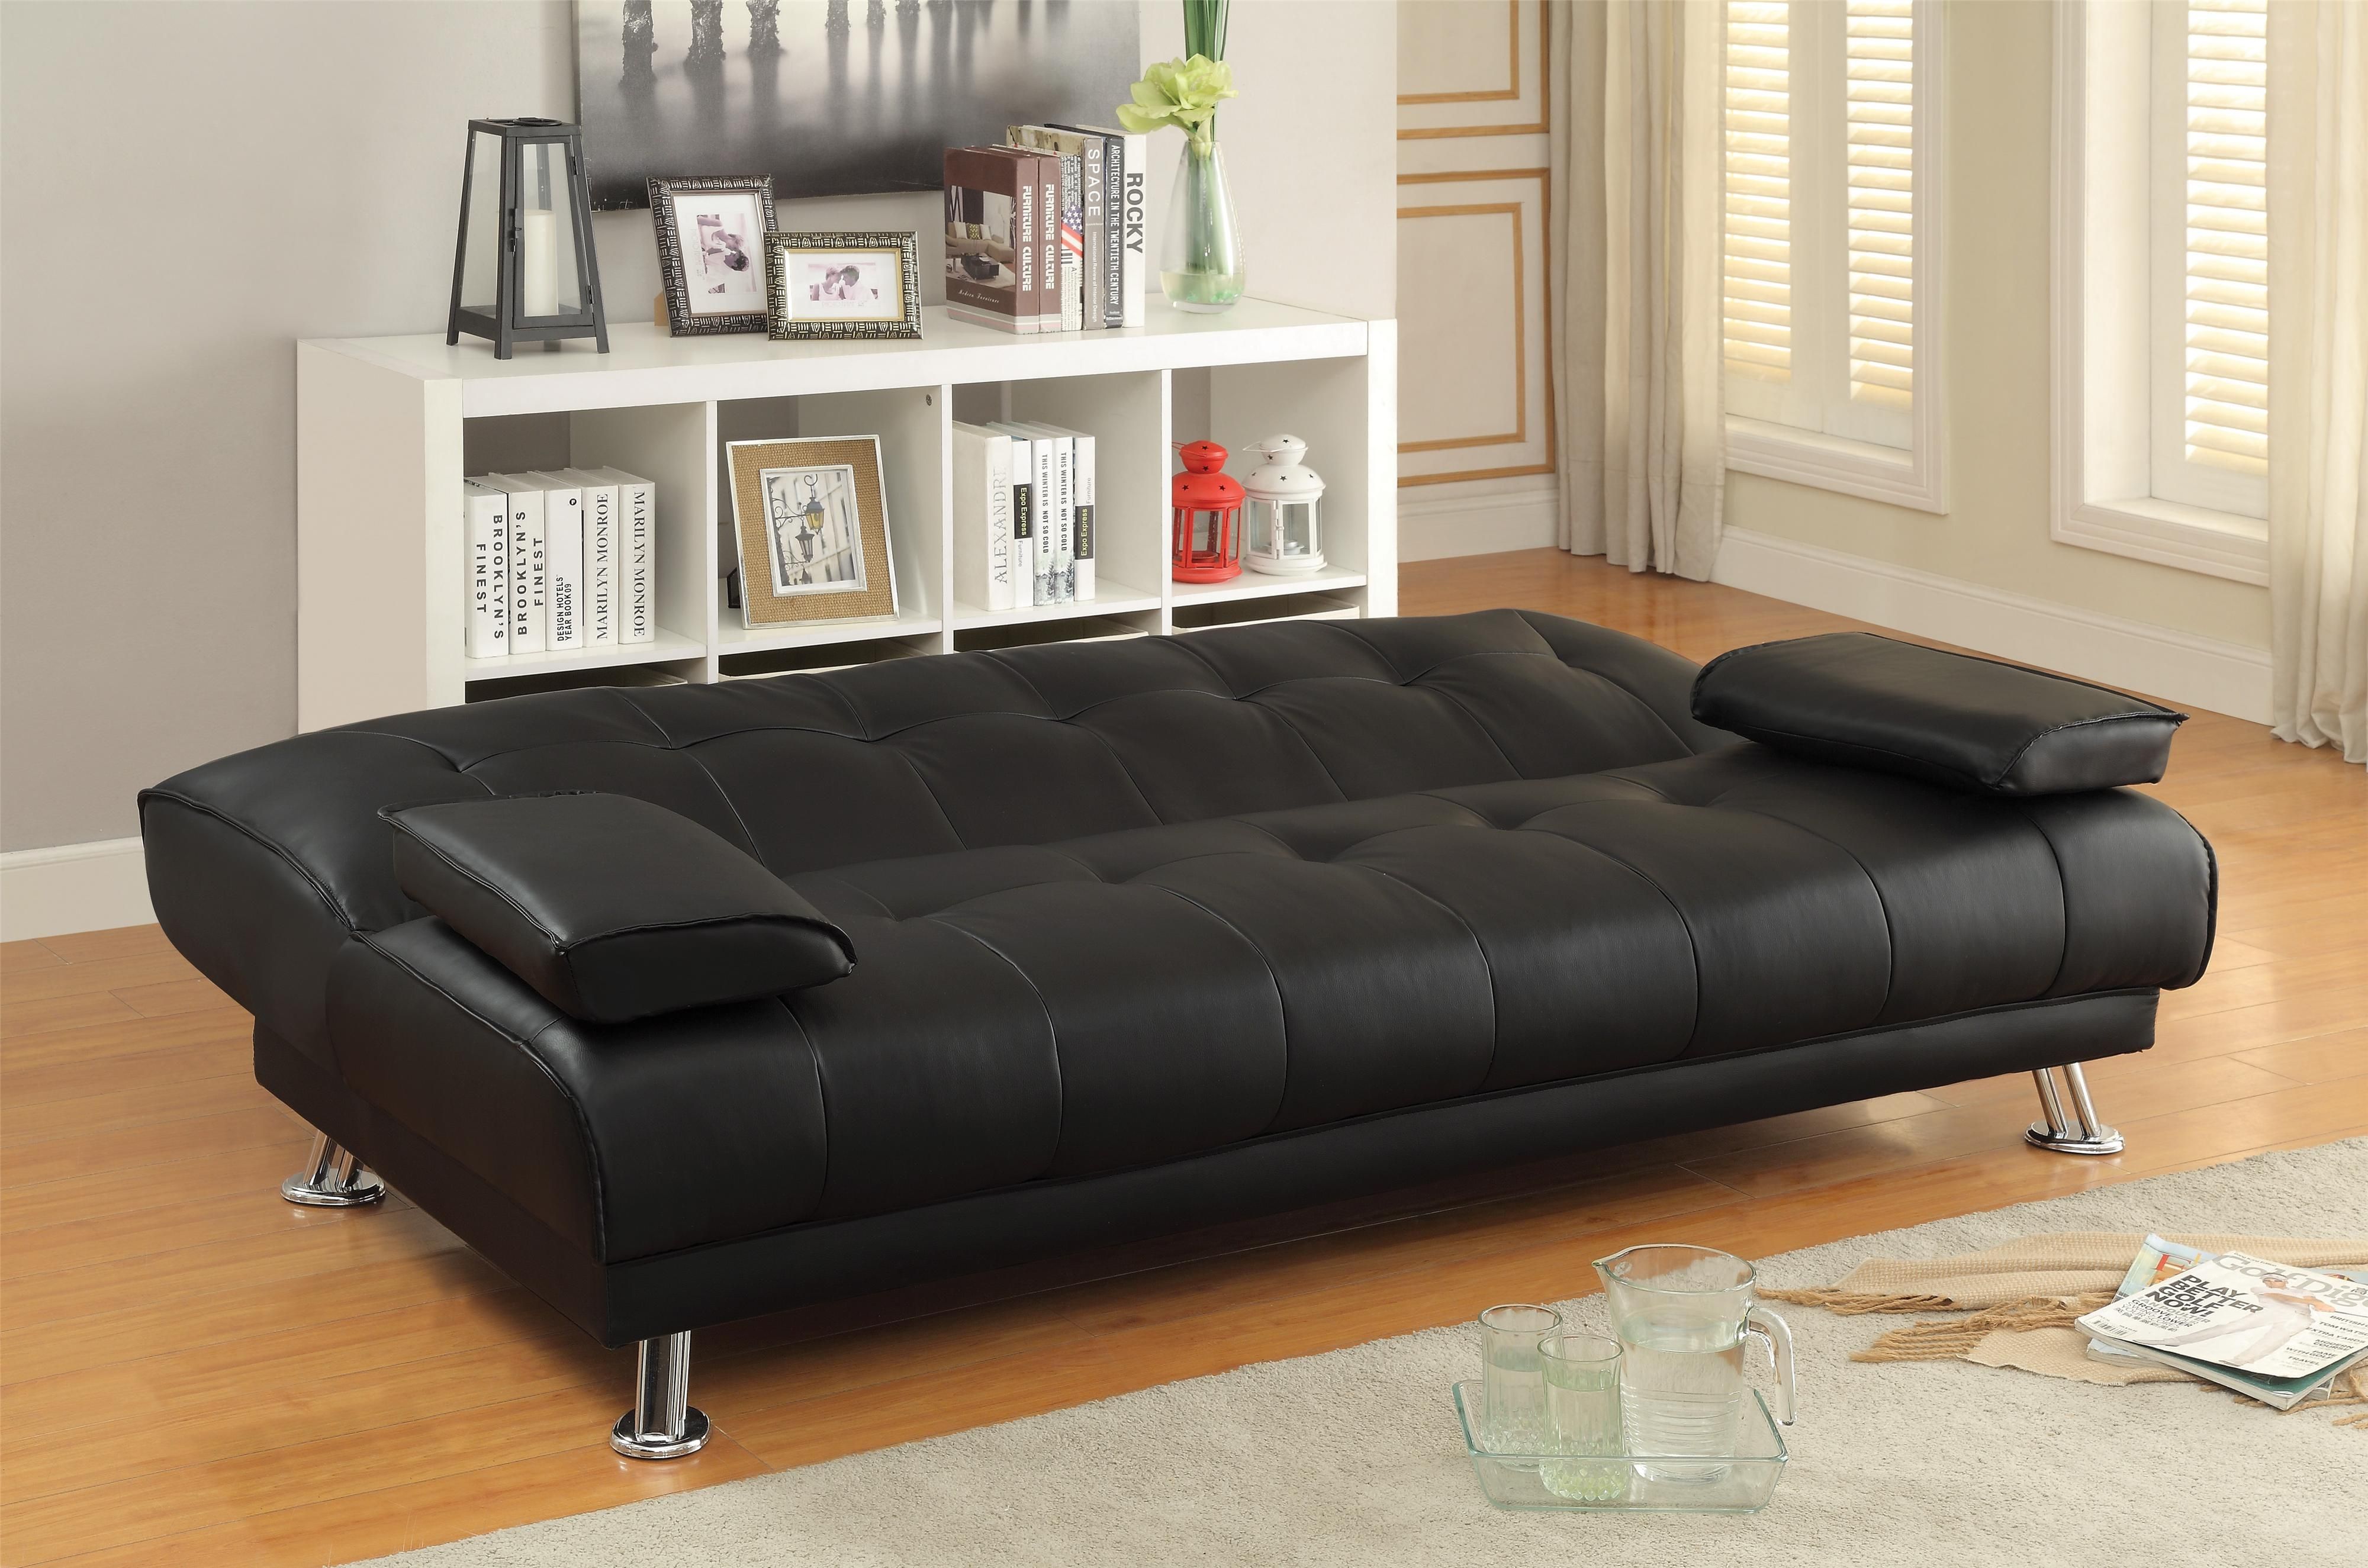 Sofa Beds And Futons Faux Leather Convertible Sofa Bed With Throughout Convertible Sofa Bed (View 6 of 15)